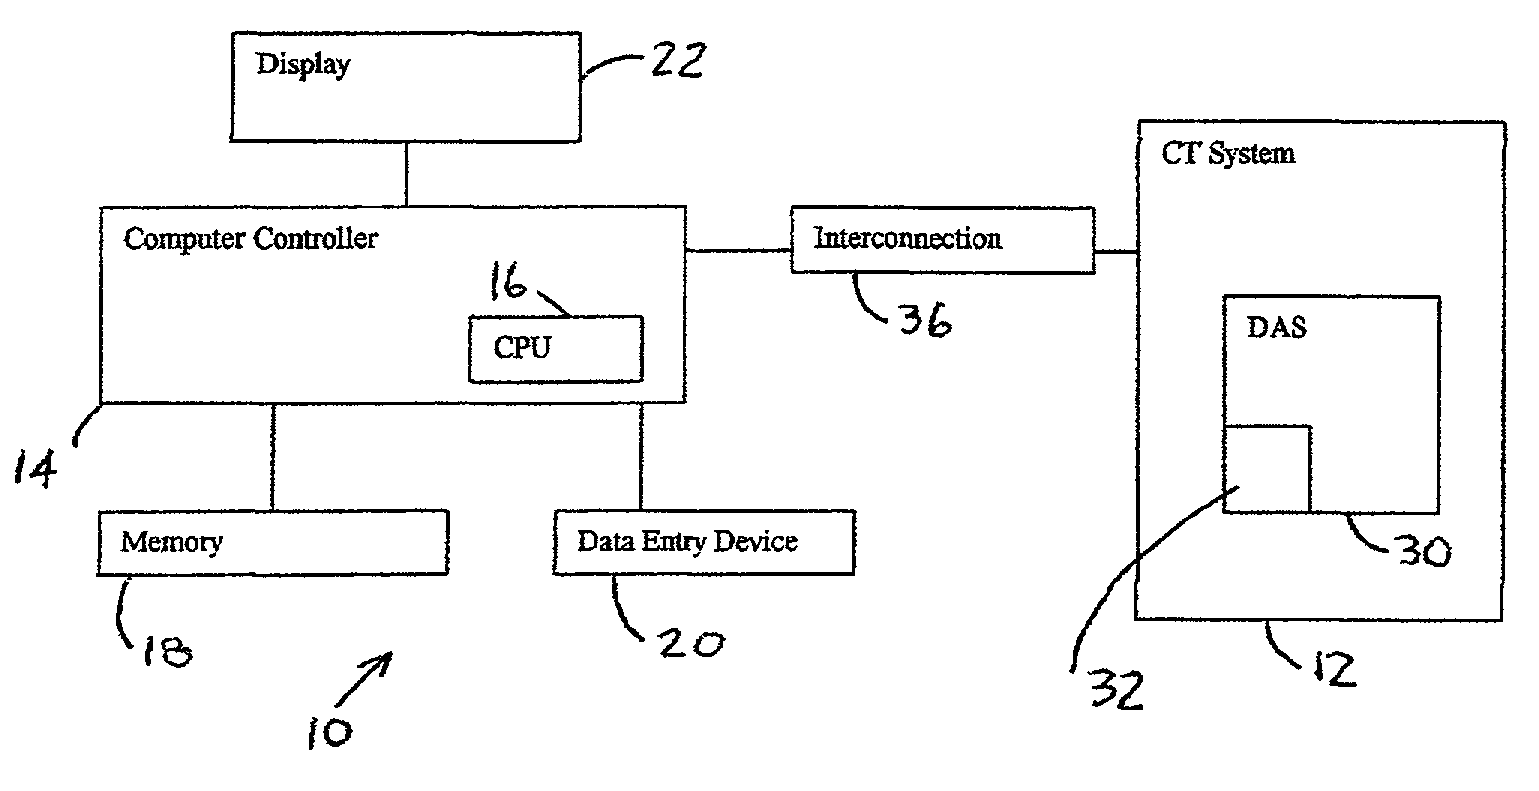 Diagnostic system for a data acquisition system